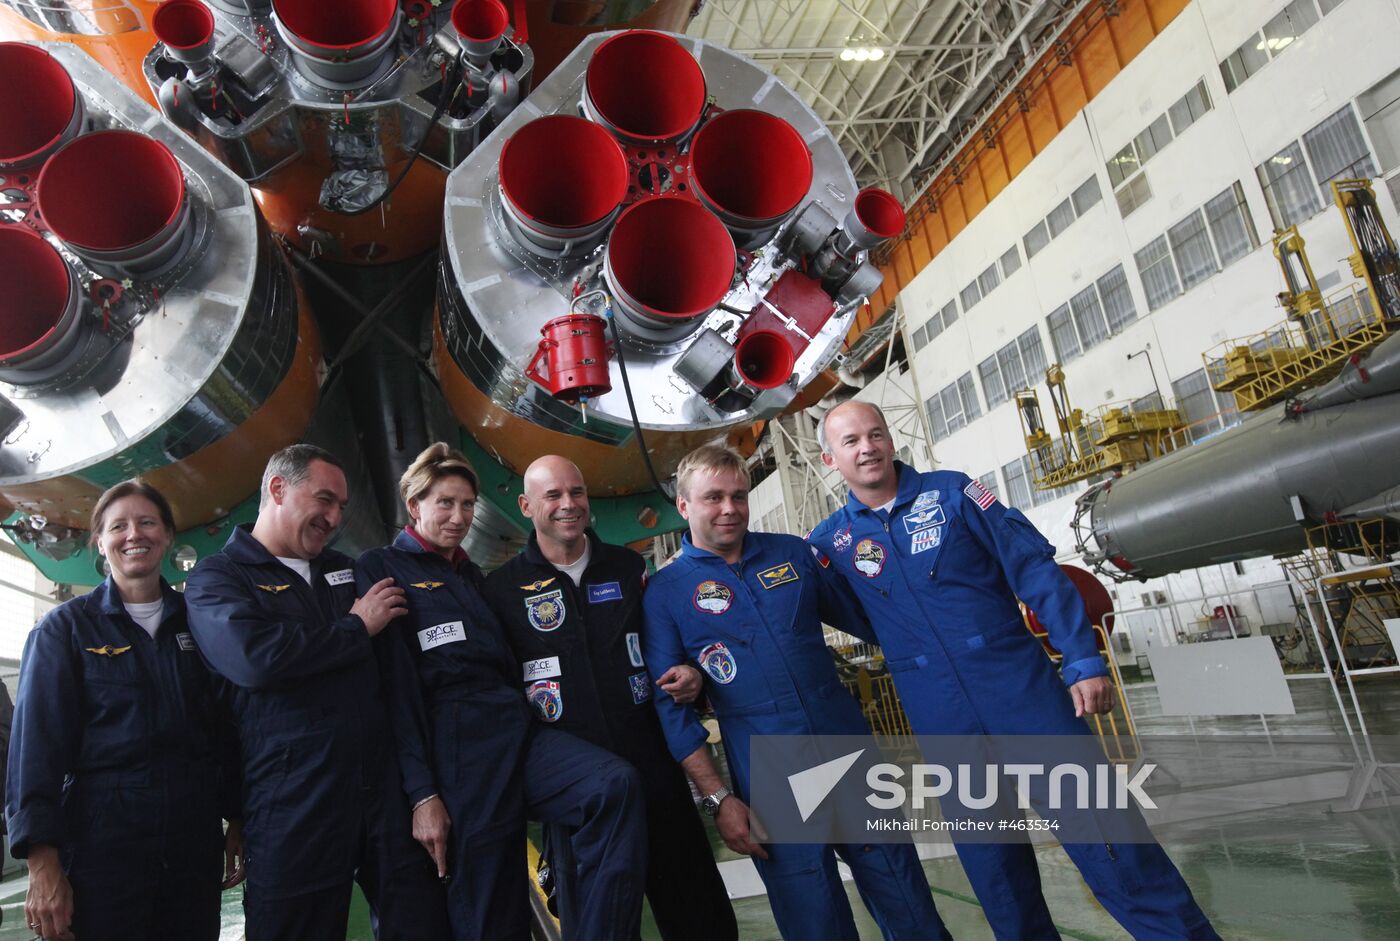 21st ISS mission main and backup crews at Baikonur Space Center